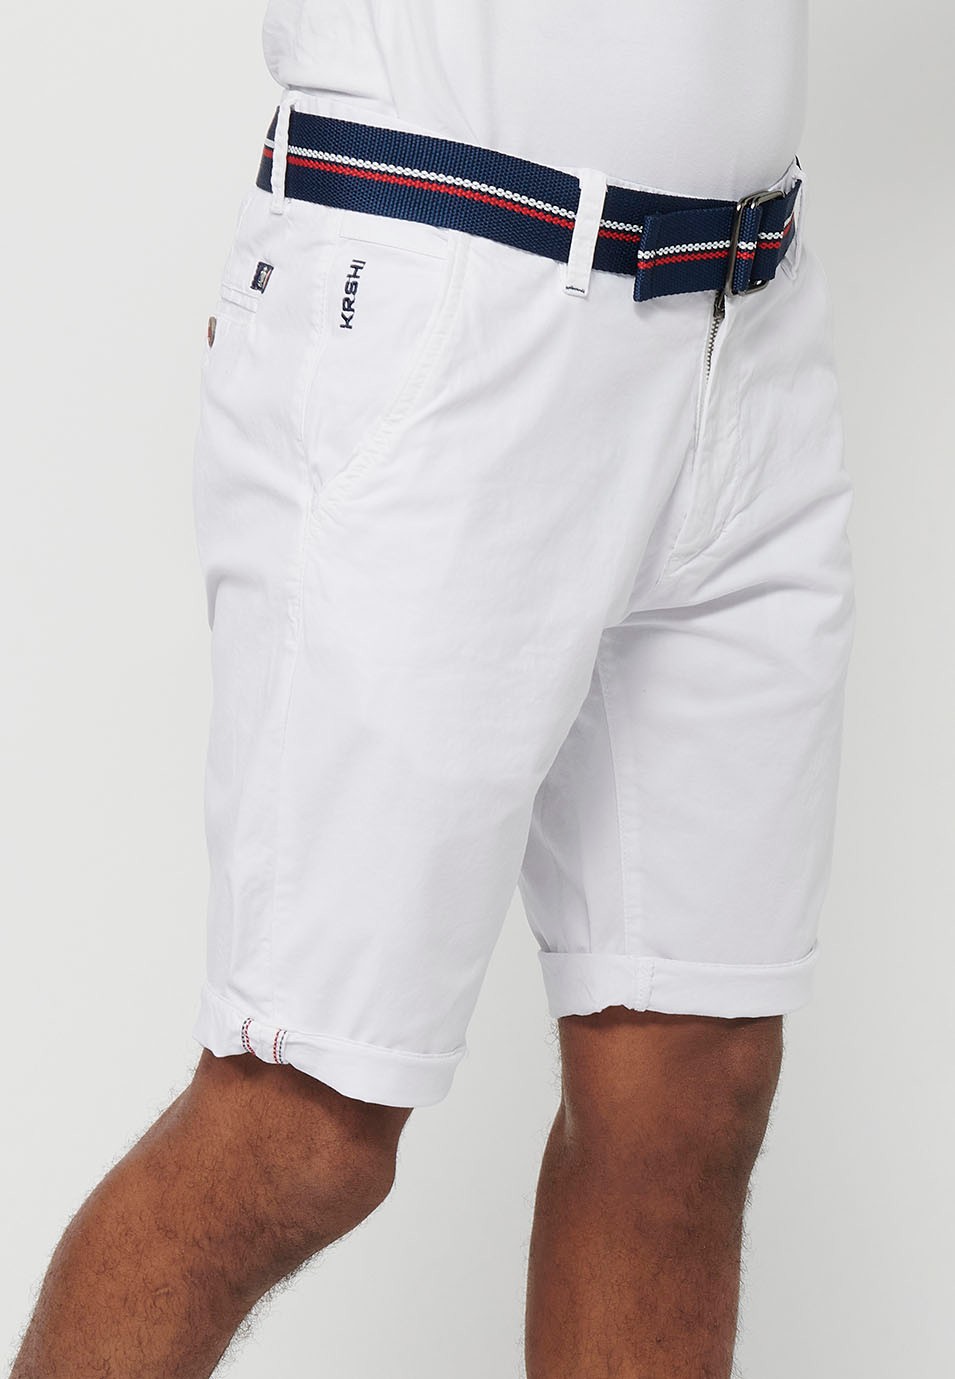 Shorts with a turn-up finish with front closure with zipper and button and belt in White for Men 4